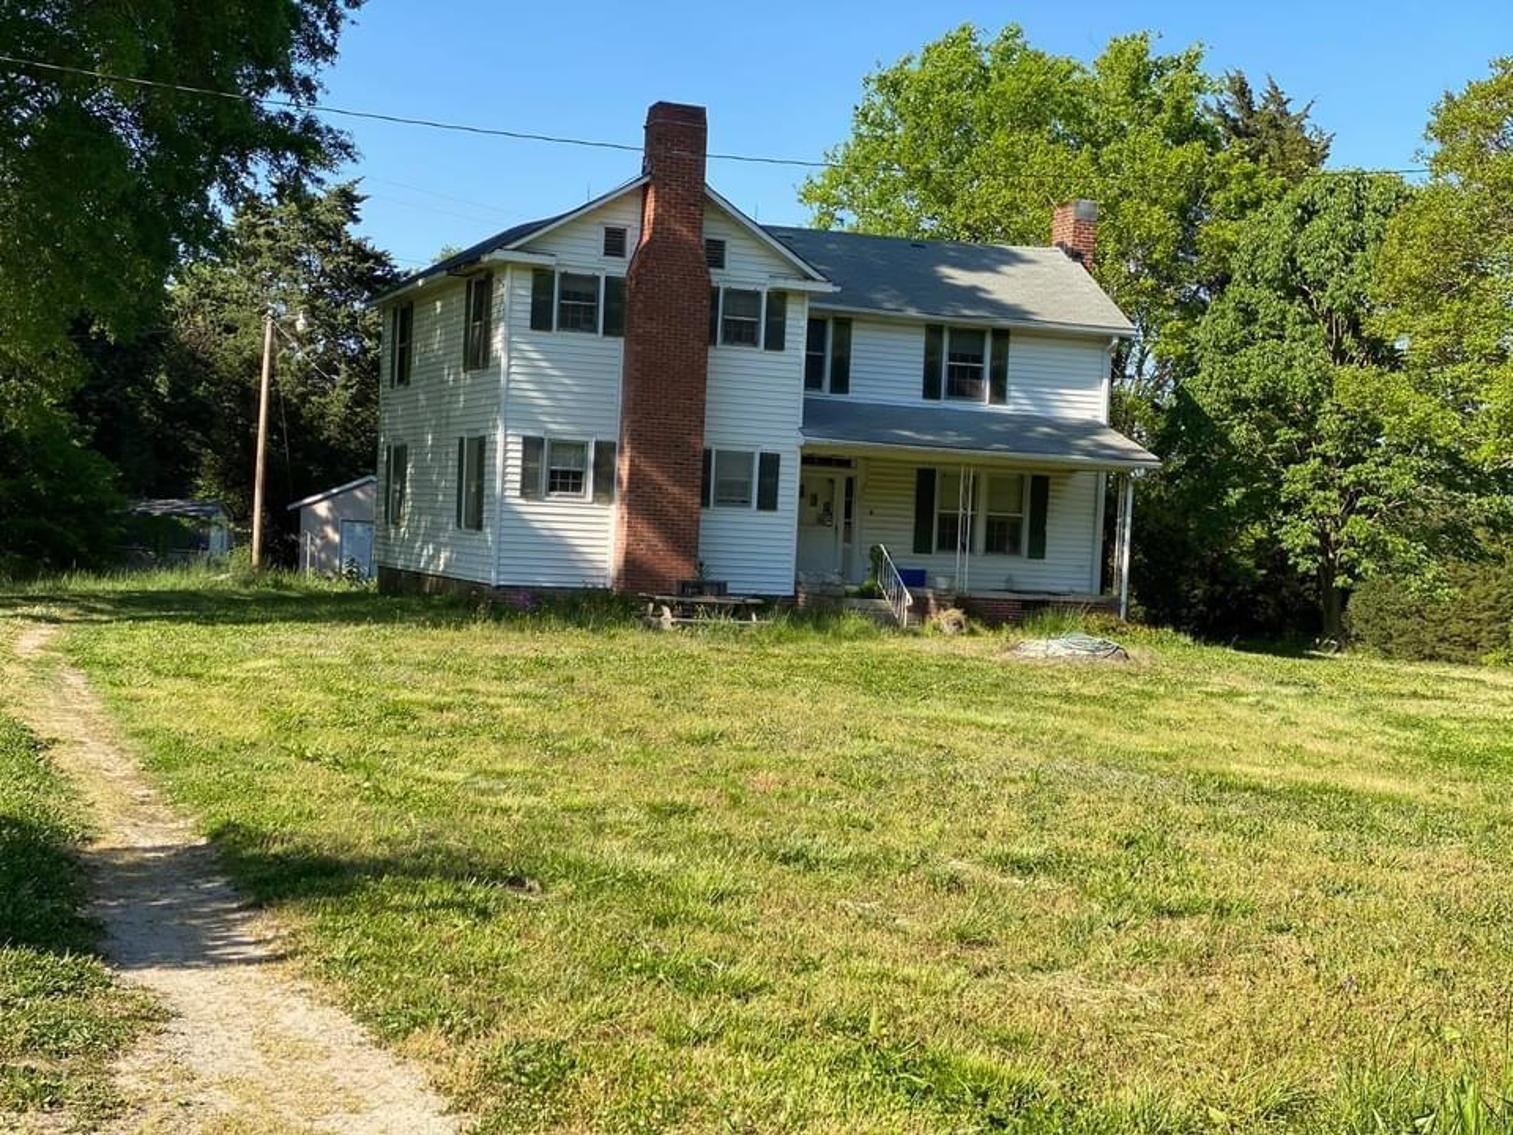 135 Year Old Farm House and 52+ Acres!